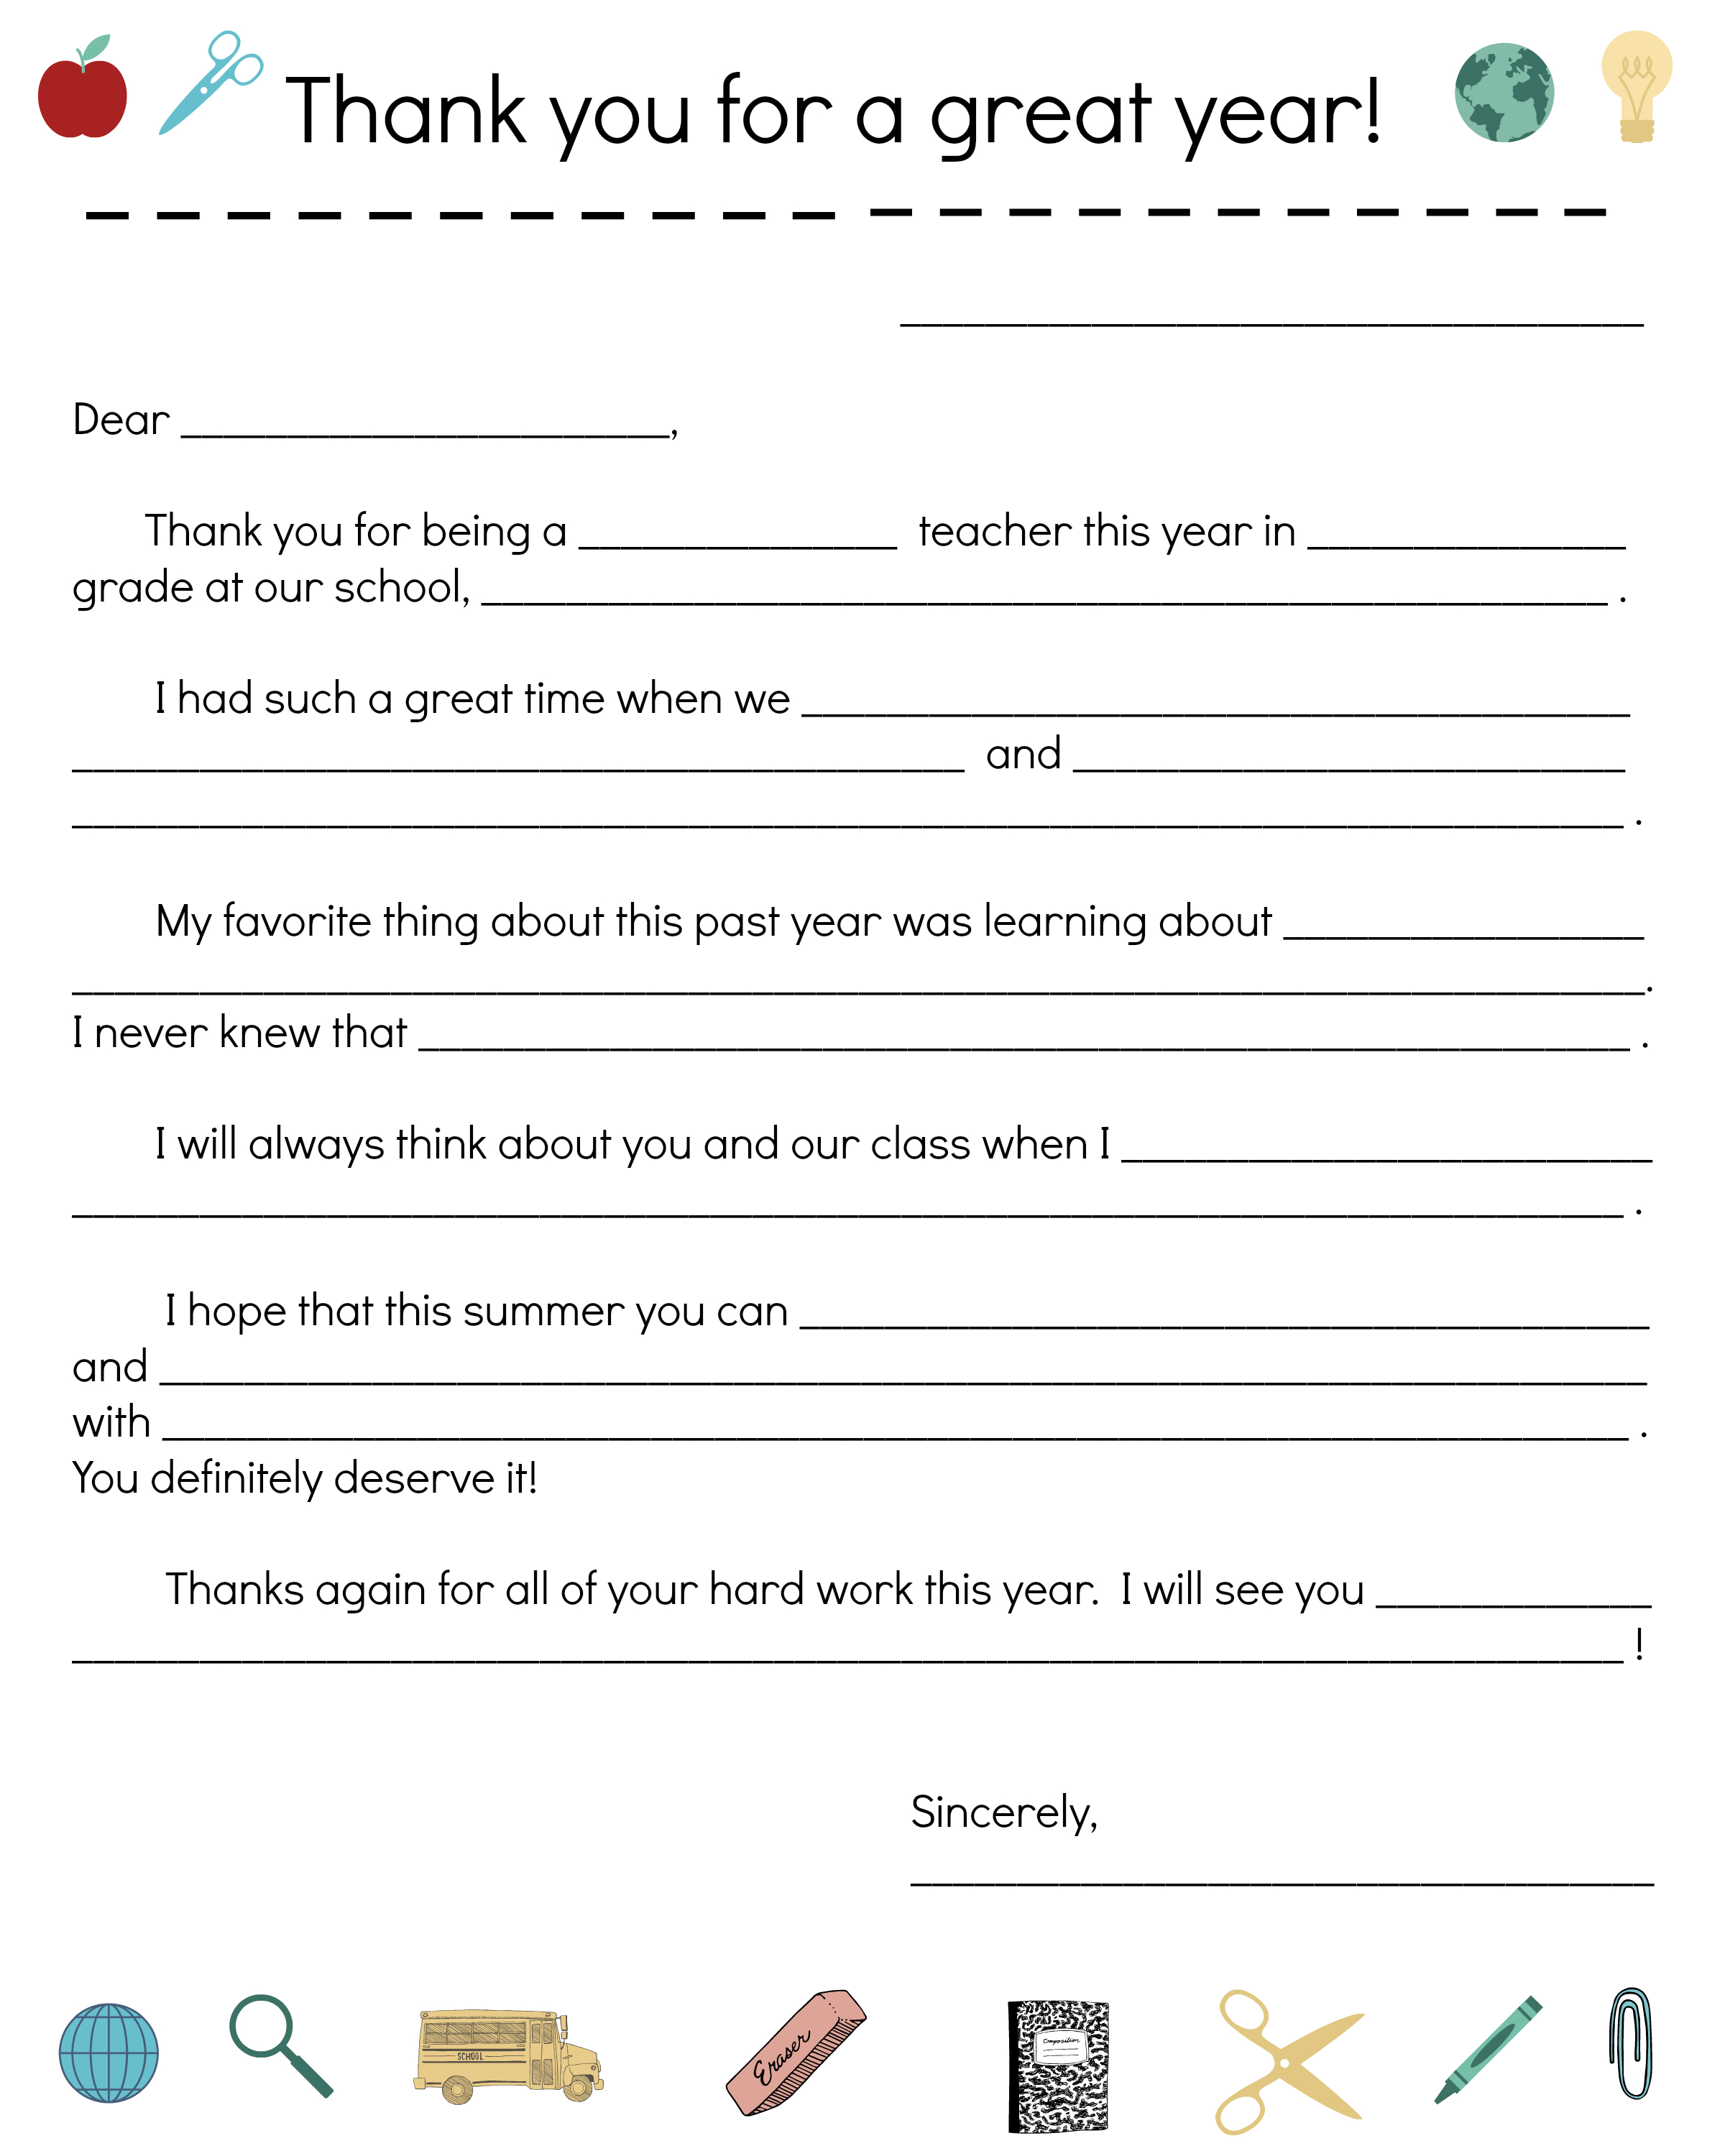 Say Thanks To Teachers With A Fill-In Note From Your Child - Free Printable Teacher Notes To Parents